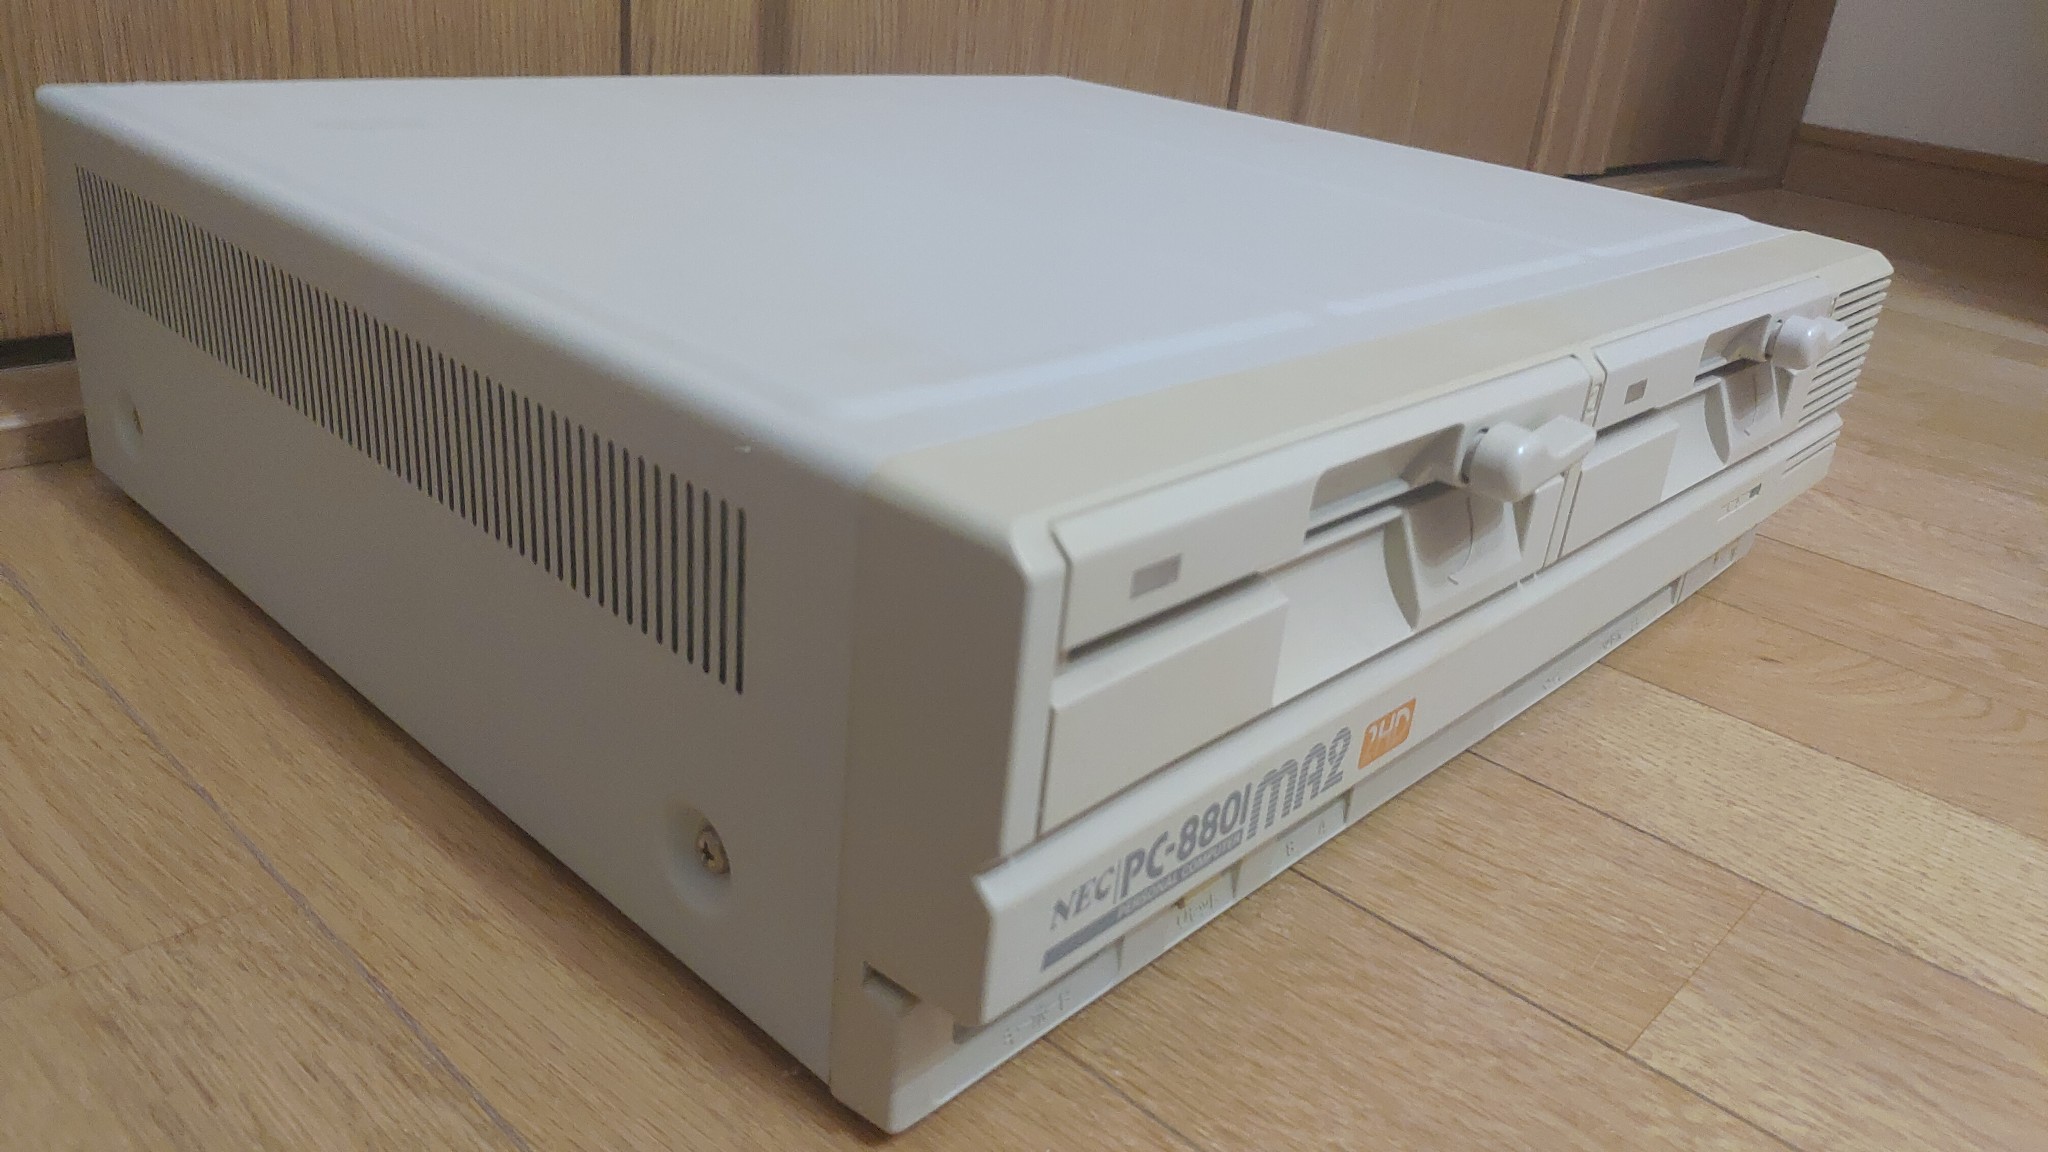 NEC PC-8801 MA2 – Japanese Vintage Computer Collection